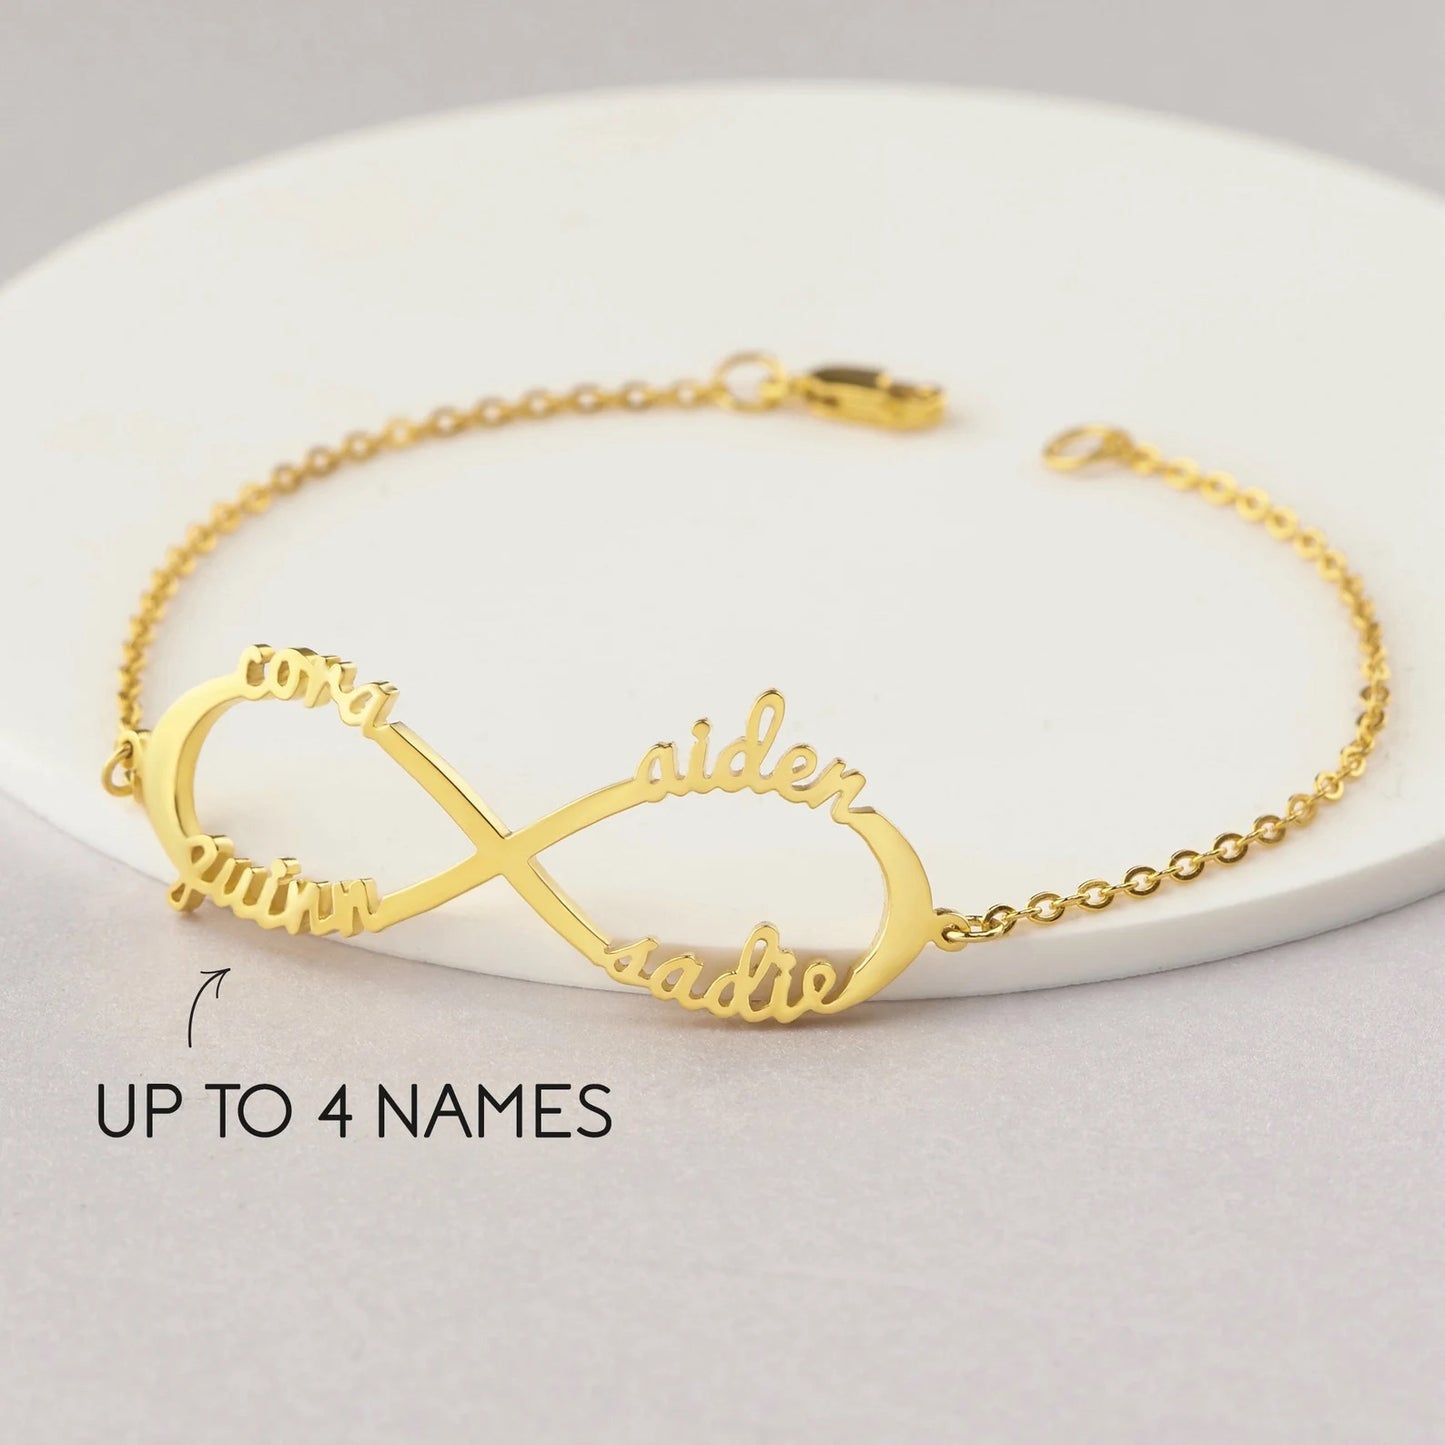 Infinity Bracelet With Names